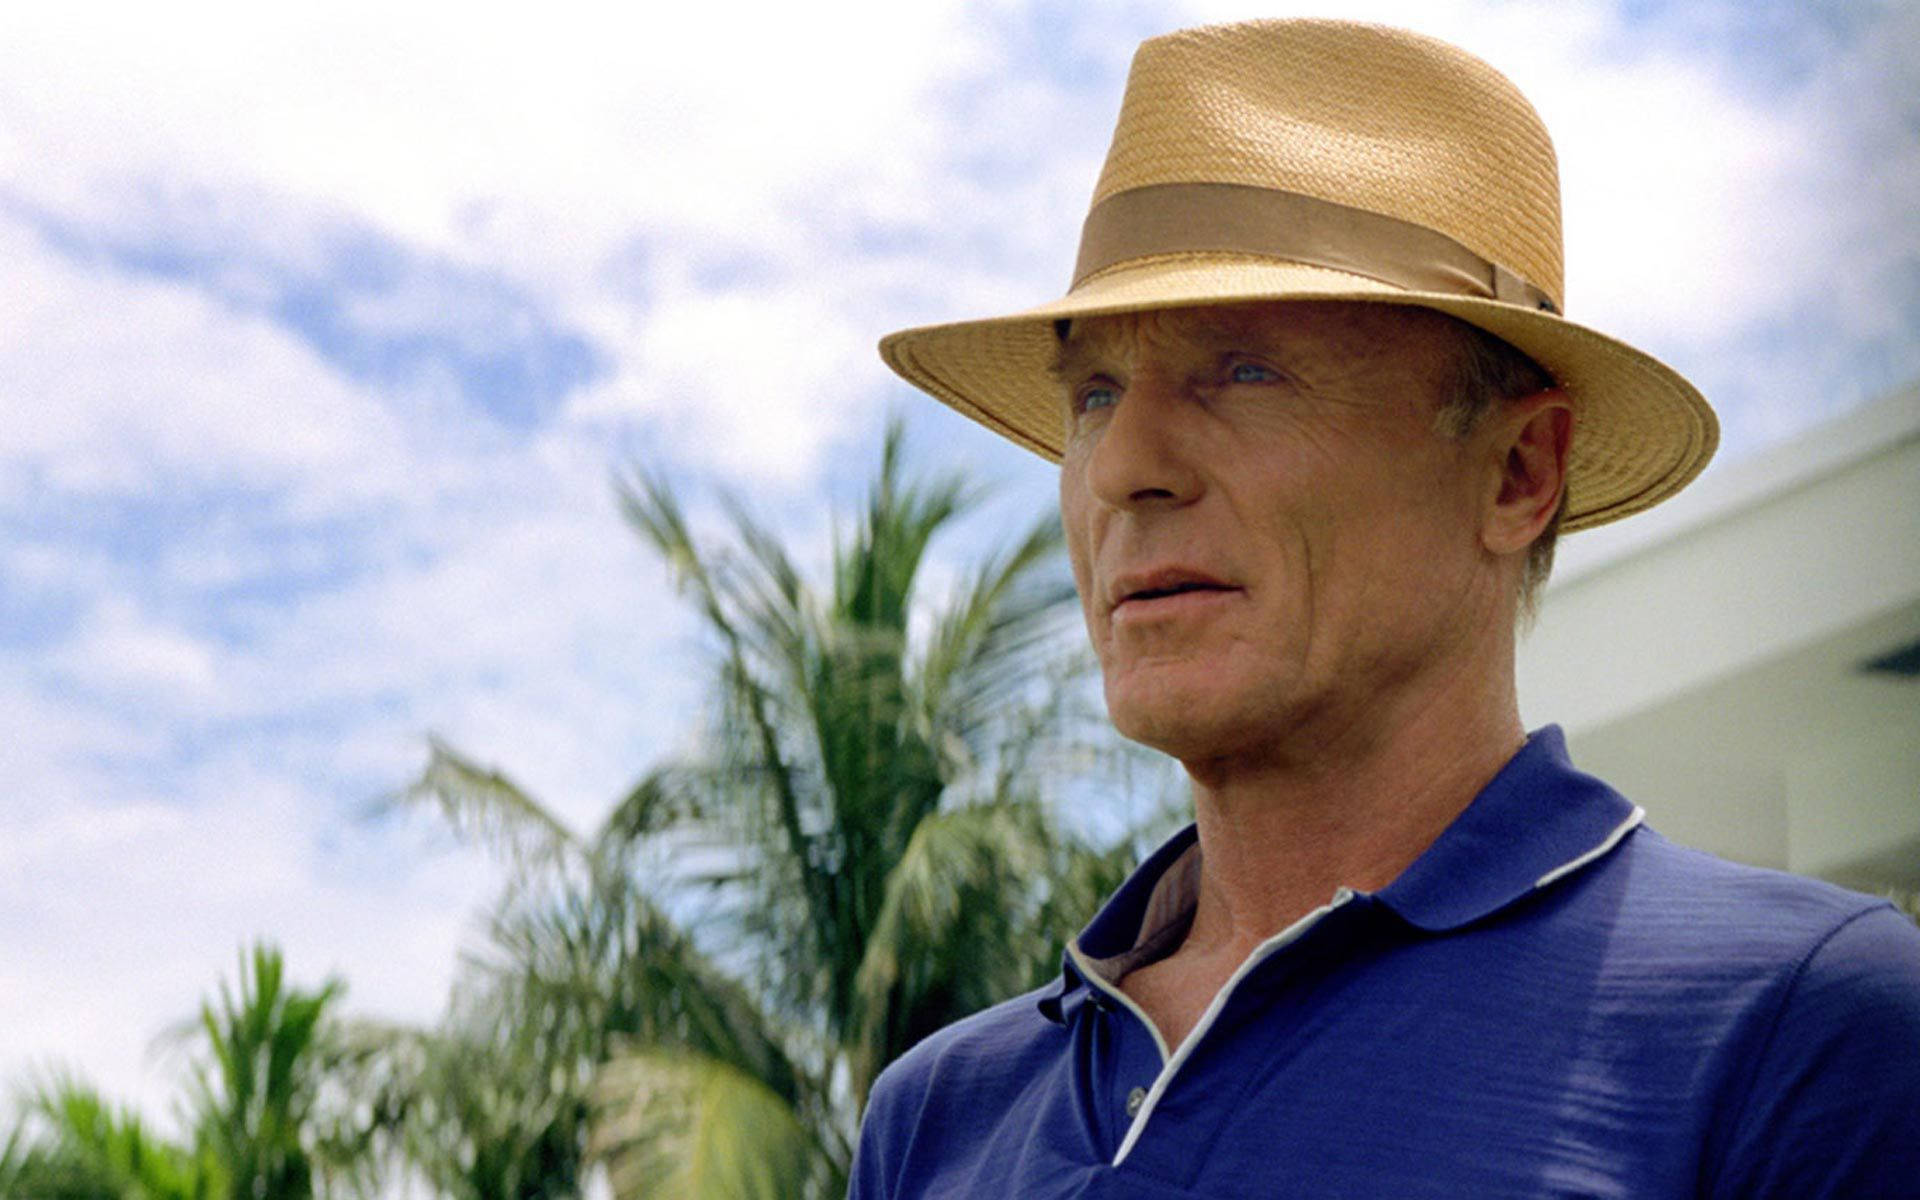 Ed Harris in a scene from the movie "Pain and Gain" Wallpaper